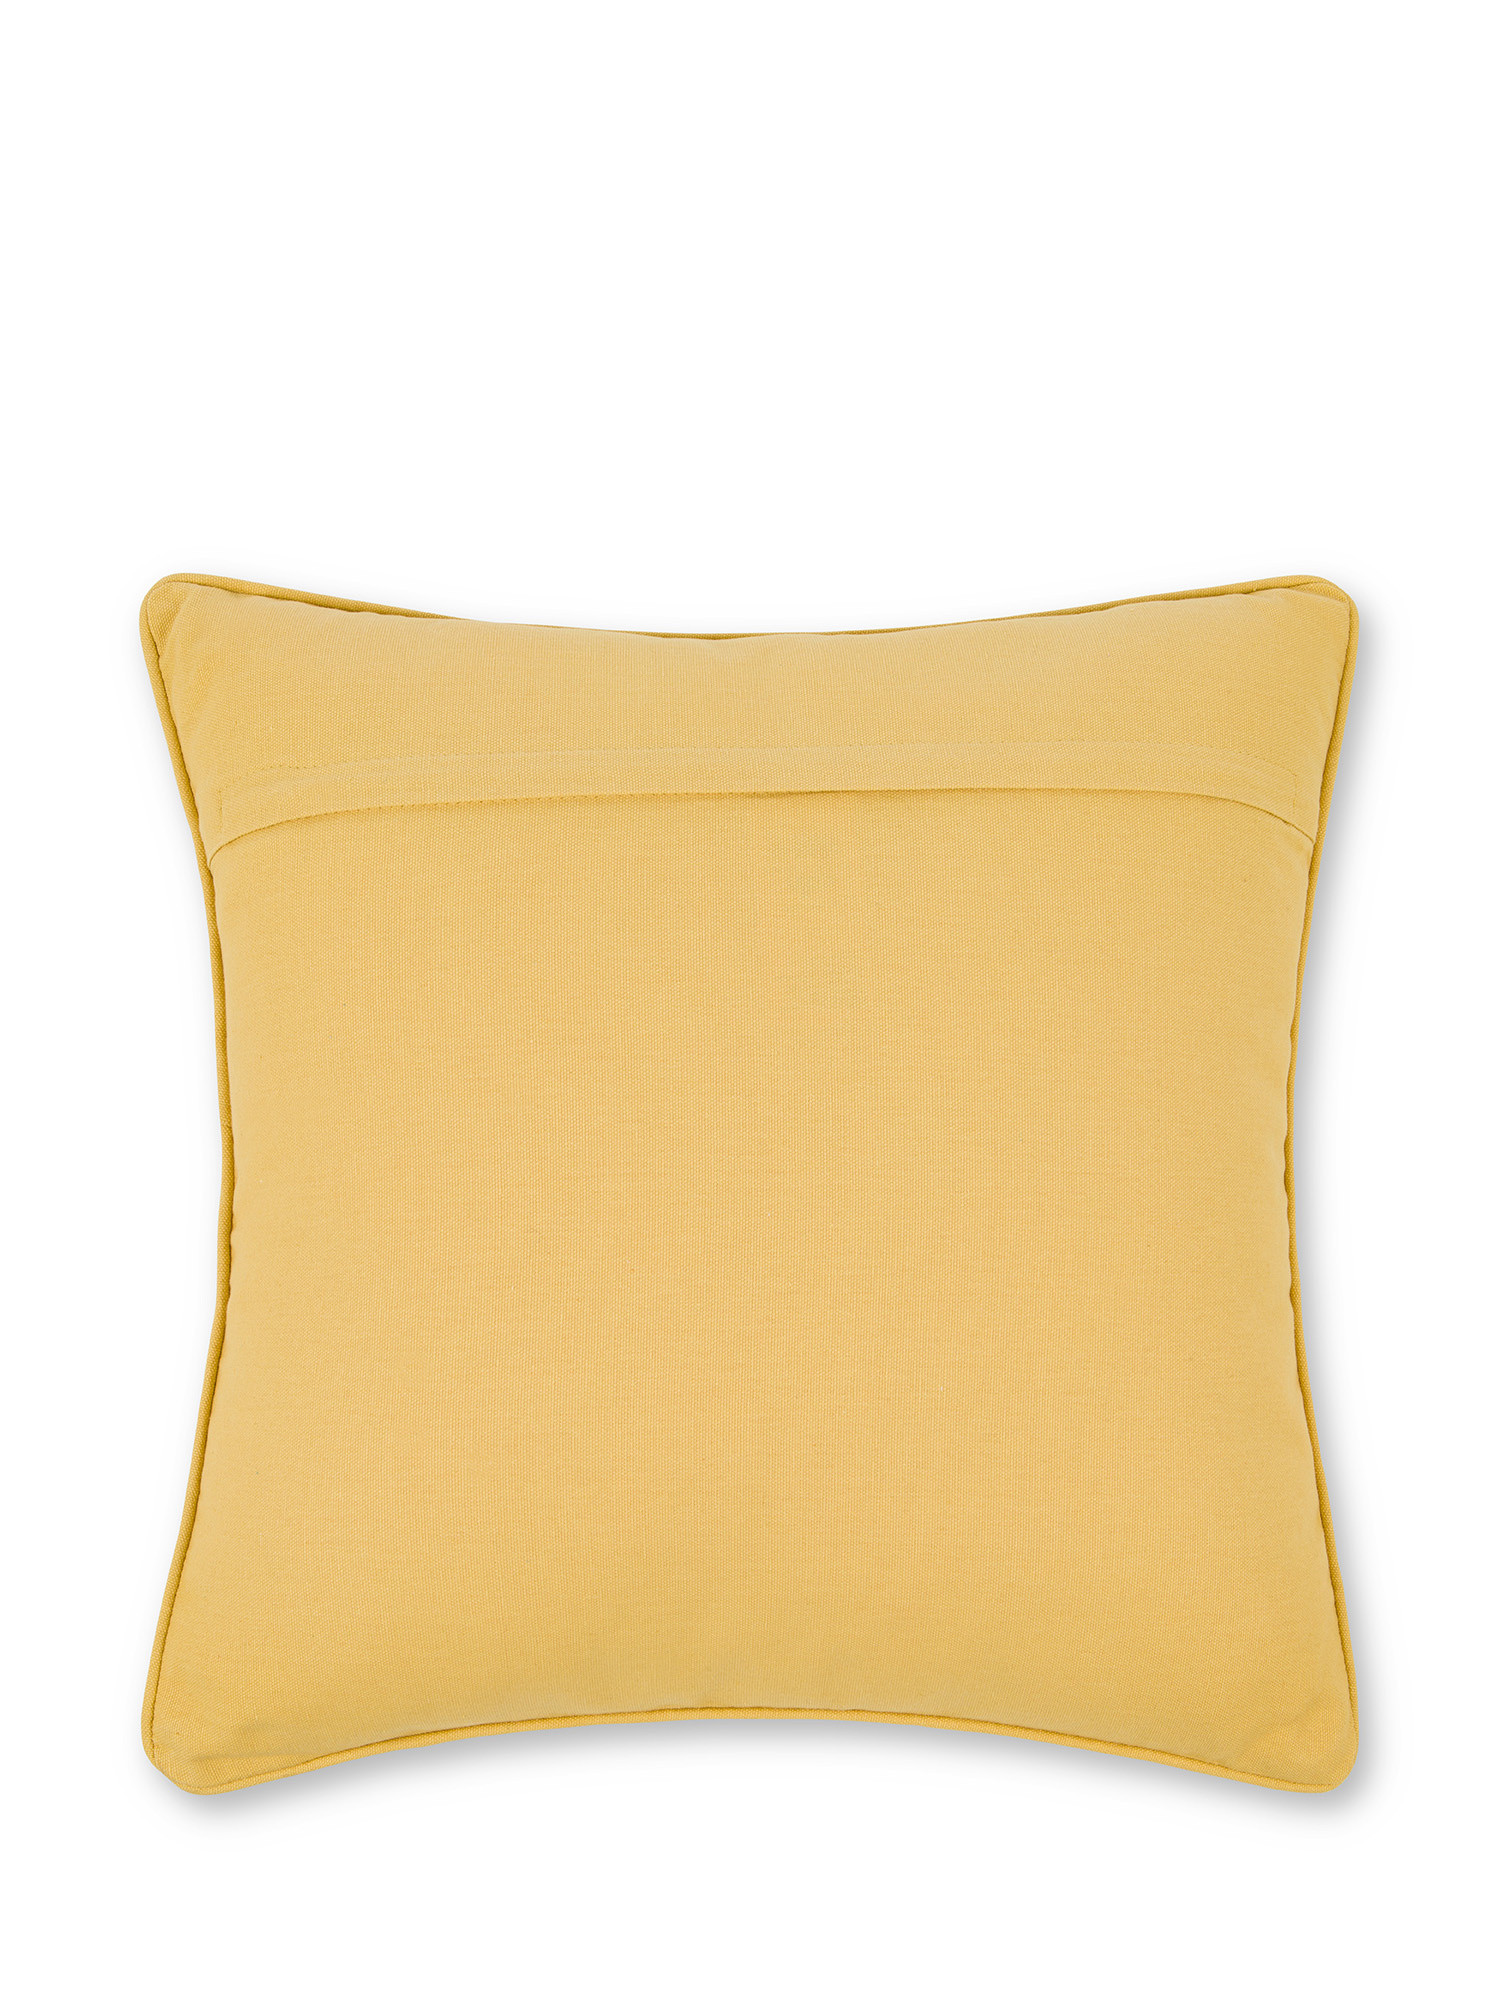 Embroidered cushion with vintage pattern 45x45cm, Ocra Yellow, large image number 1